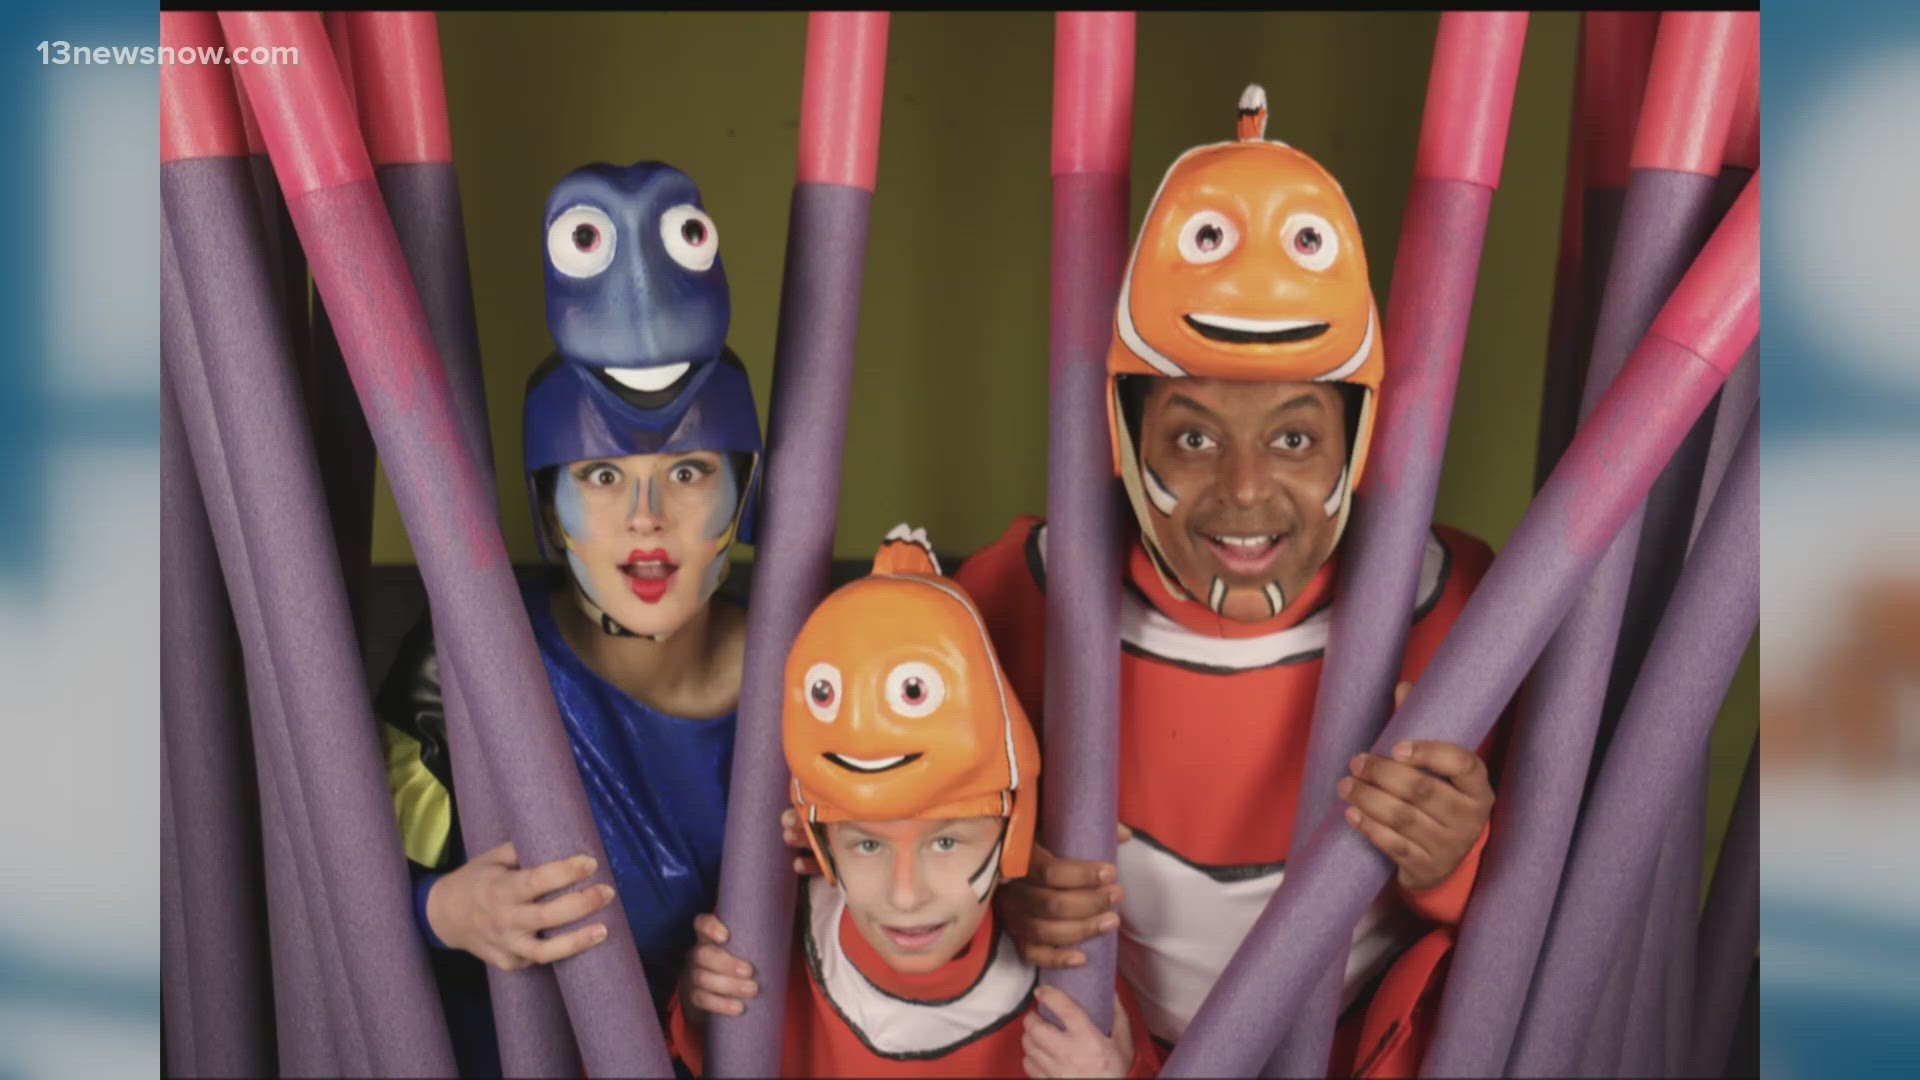 This stage adaptation of the beloved movie "Finding Nemo" follows Nemo and all his friends on a new adventure.